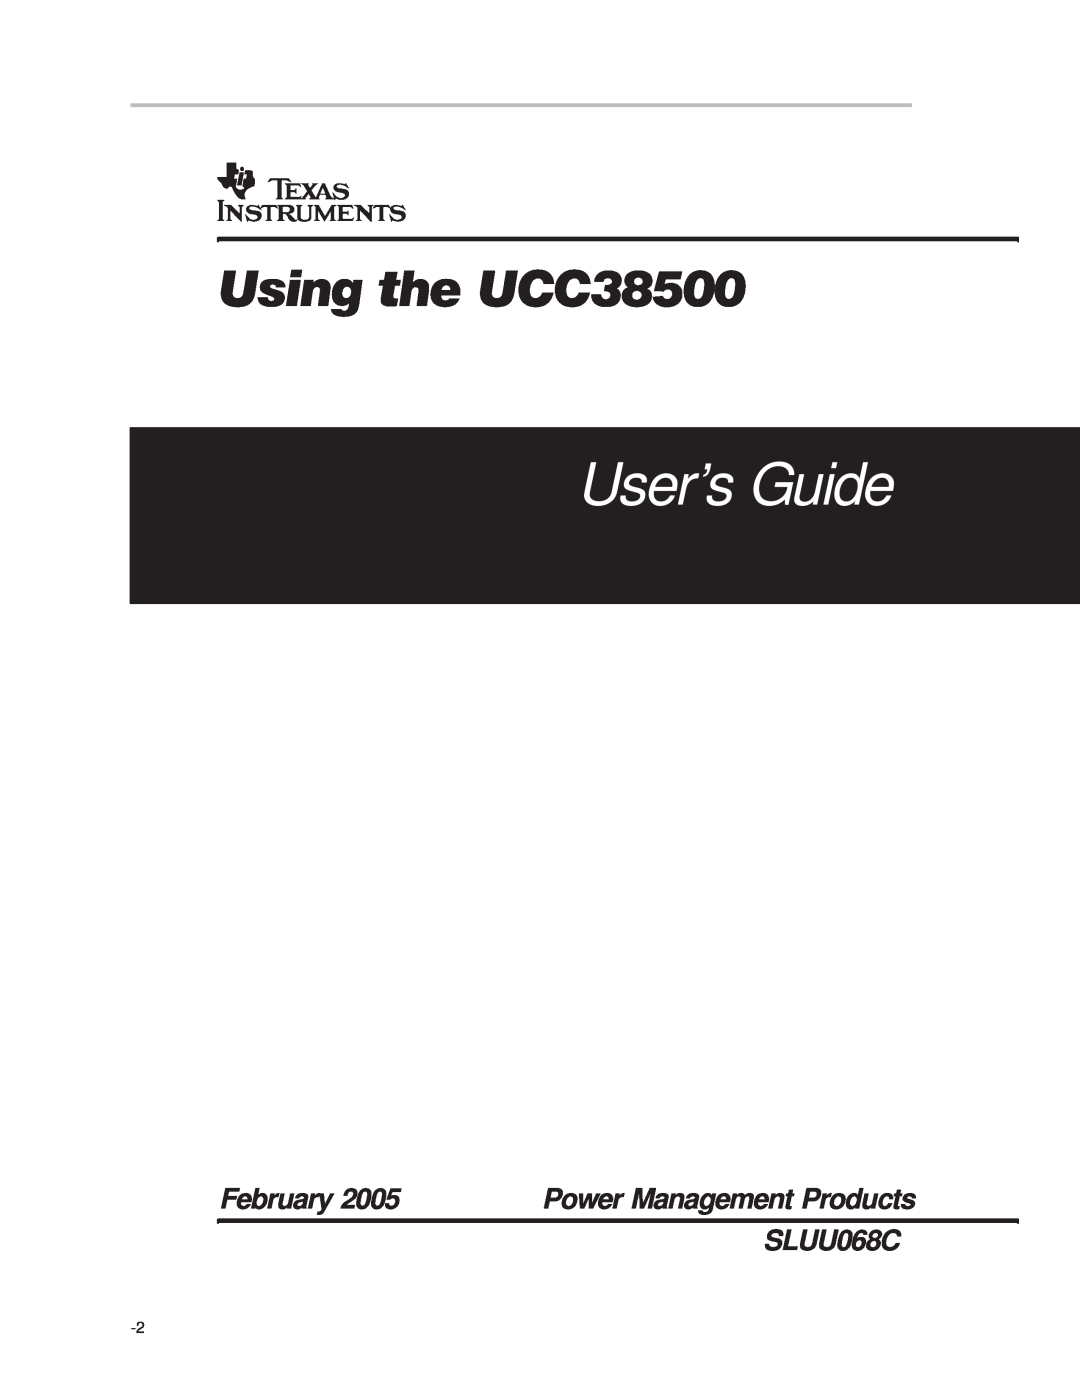 Texas Instruments UCC38500EVM manual User’s Guide, Using the UCC38500, February, Power Management Products, SLUU068C 